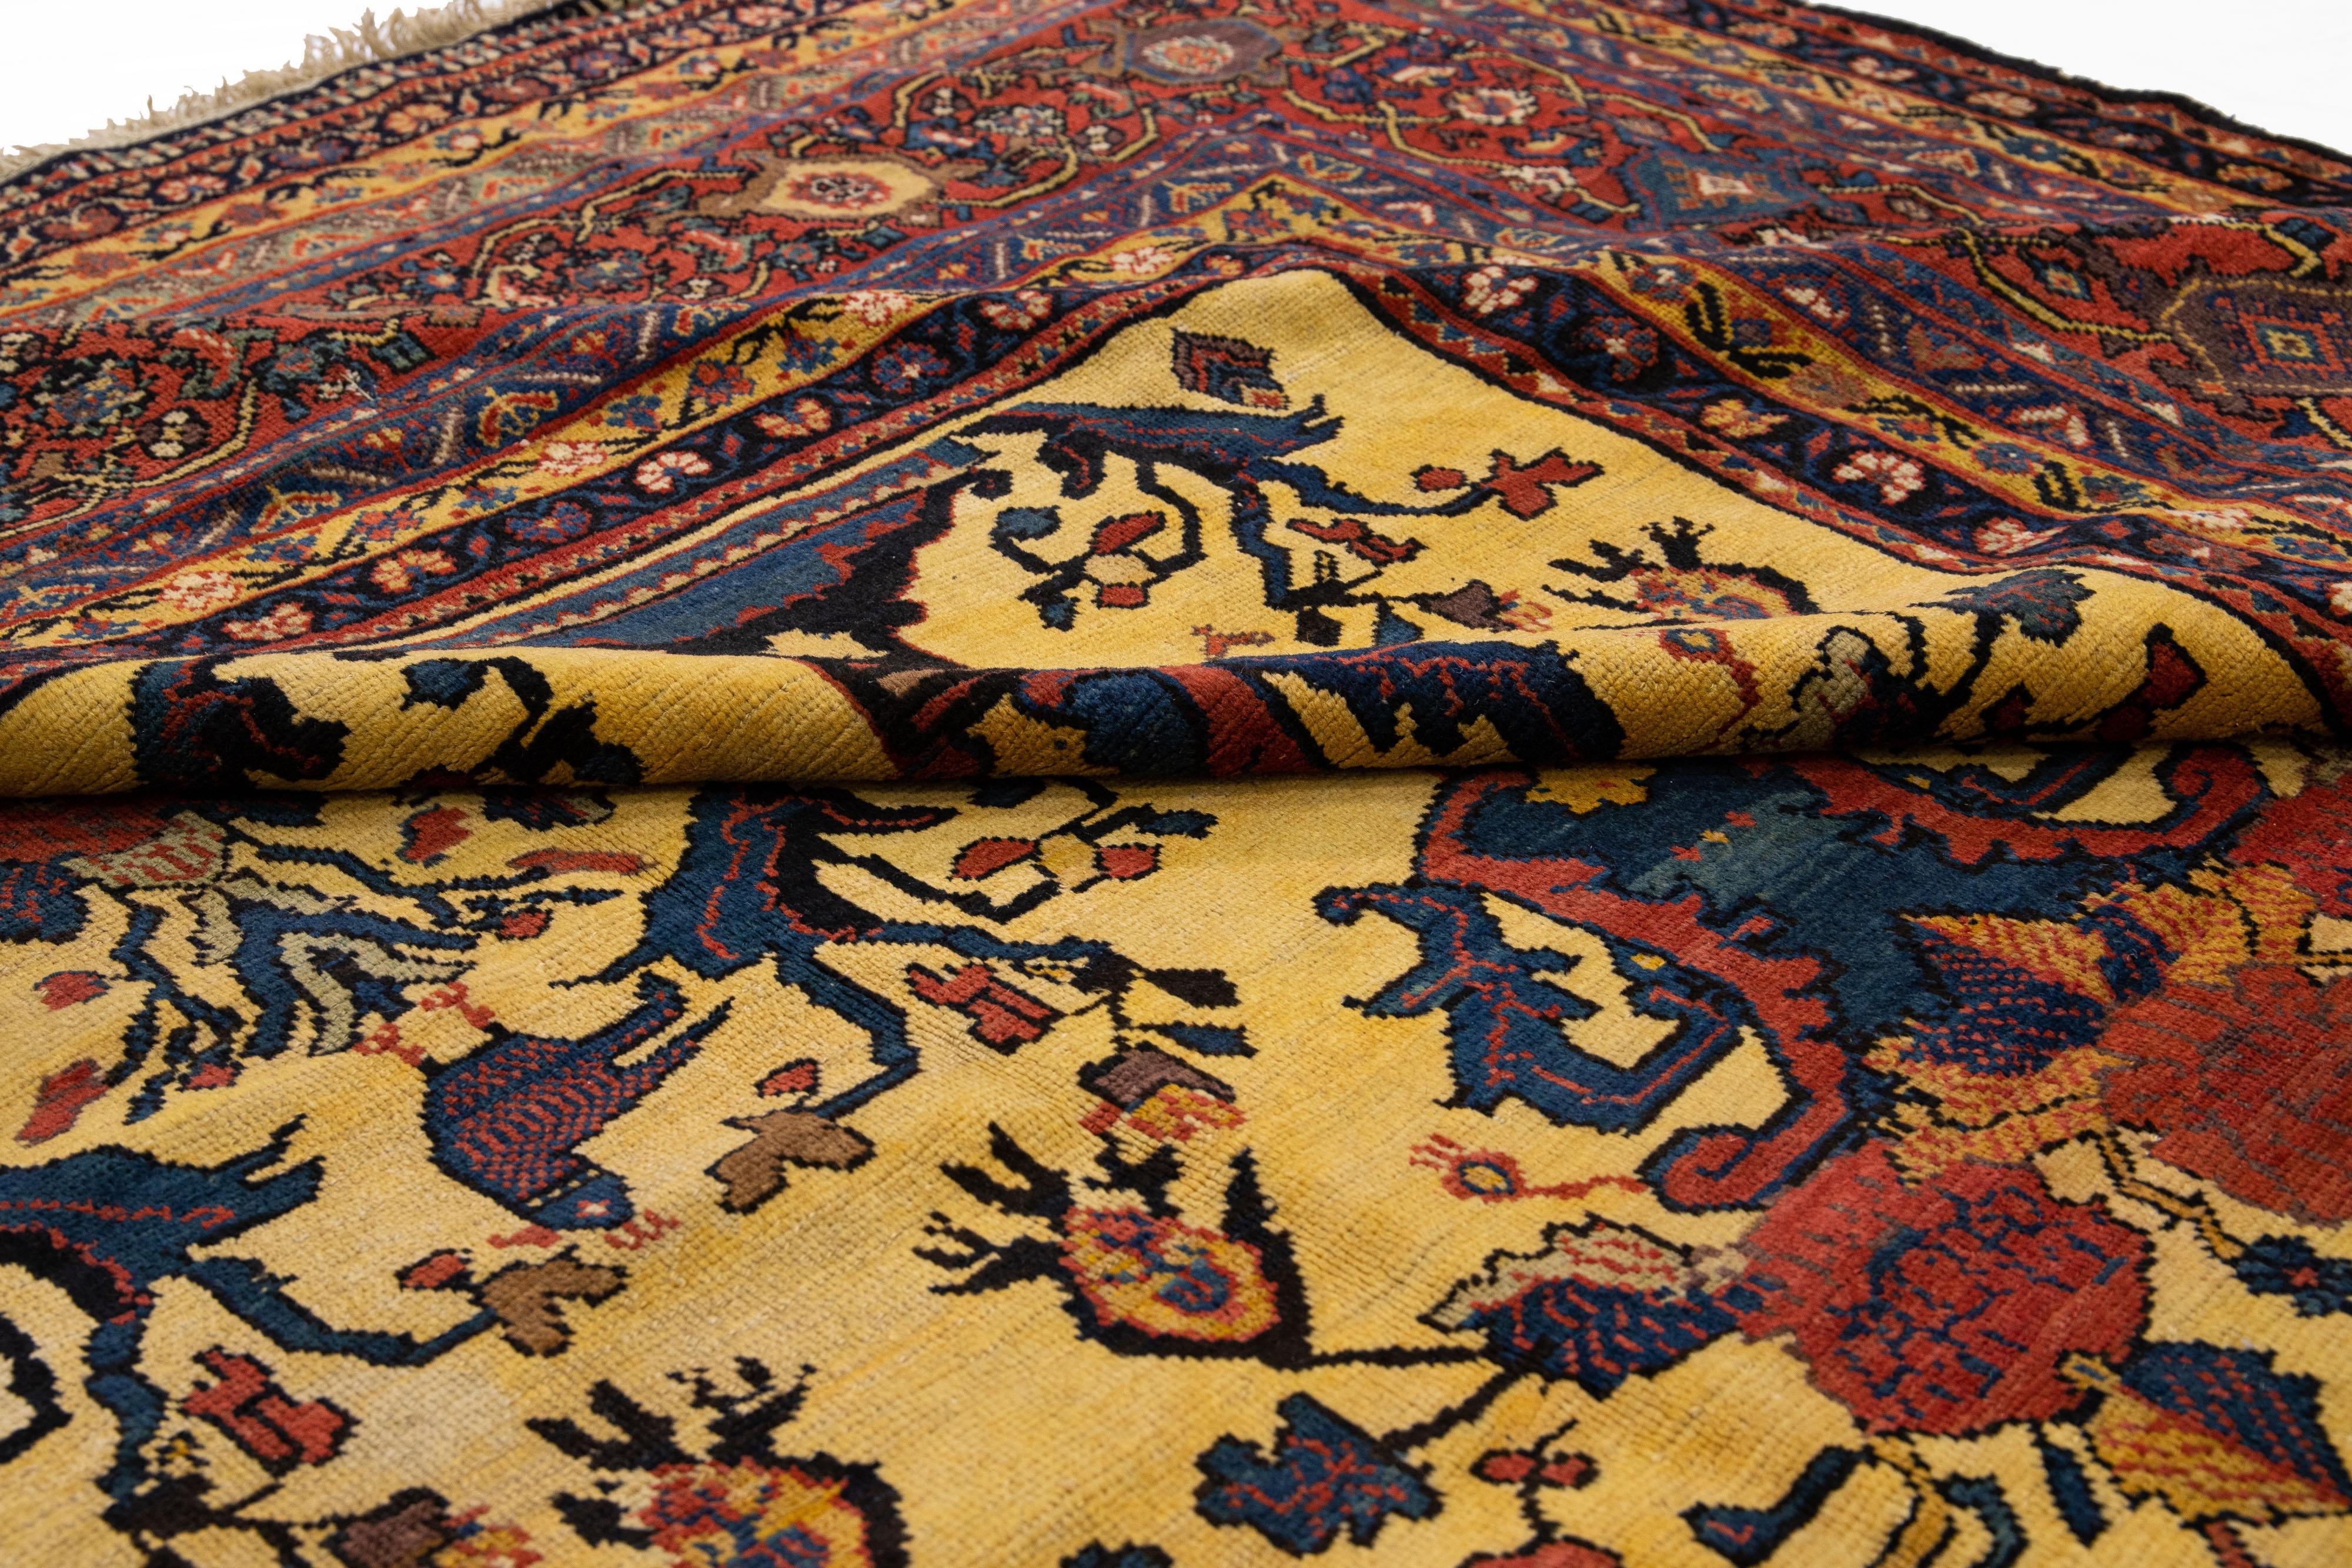 Beautiful antique Bakhtiari hand-knotted wool rug with a yellow field. This piece has a rusted-designed frame with multicolor accents on a gorgeous all-over classic floral design.

This rug measures 13'9